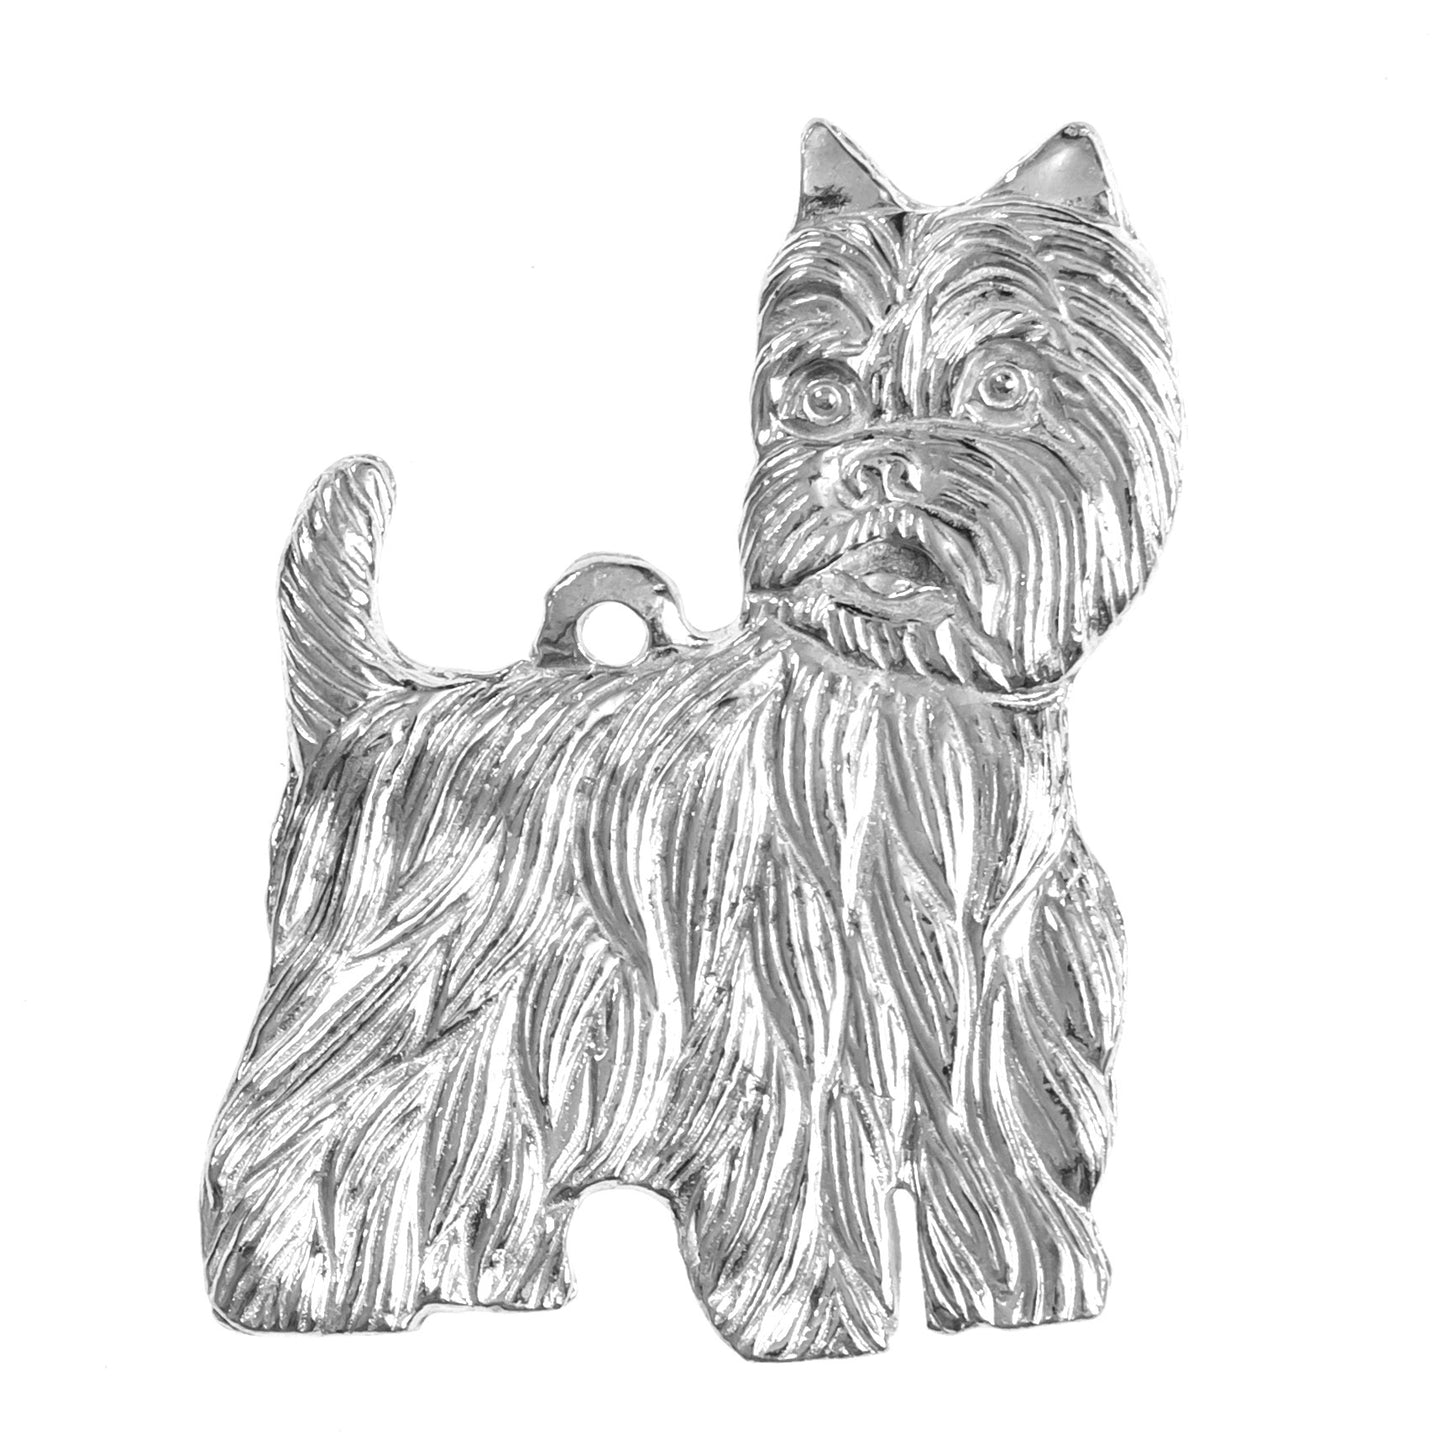 Silver Pewter Metal West Highland Terrier Ornament Top Gift Ideas - House of Morgan Pewter